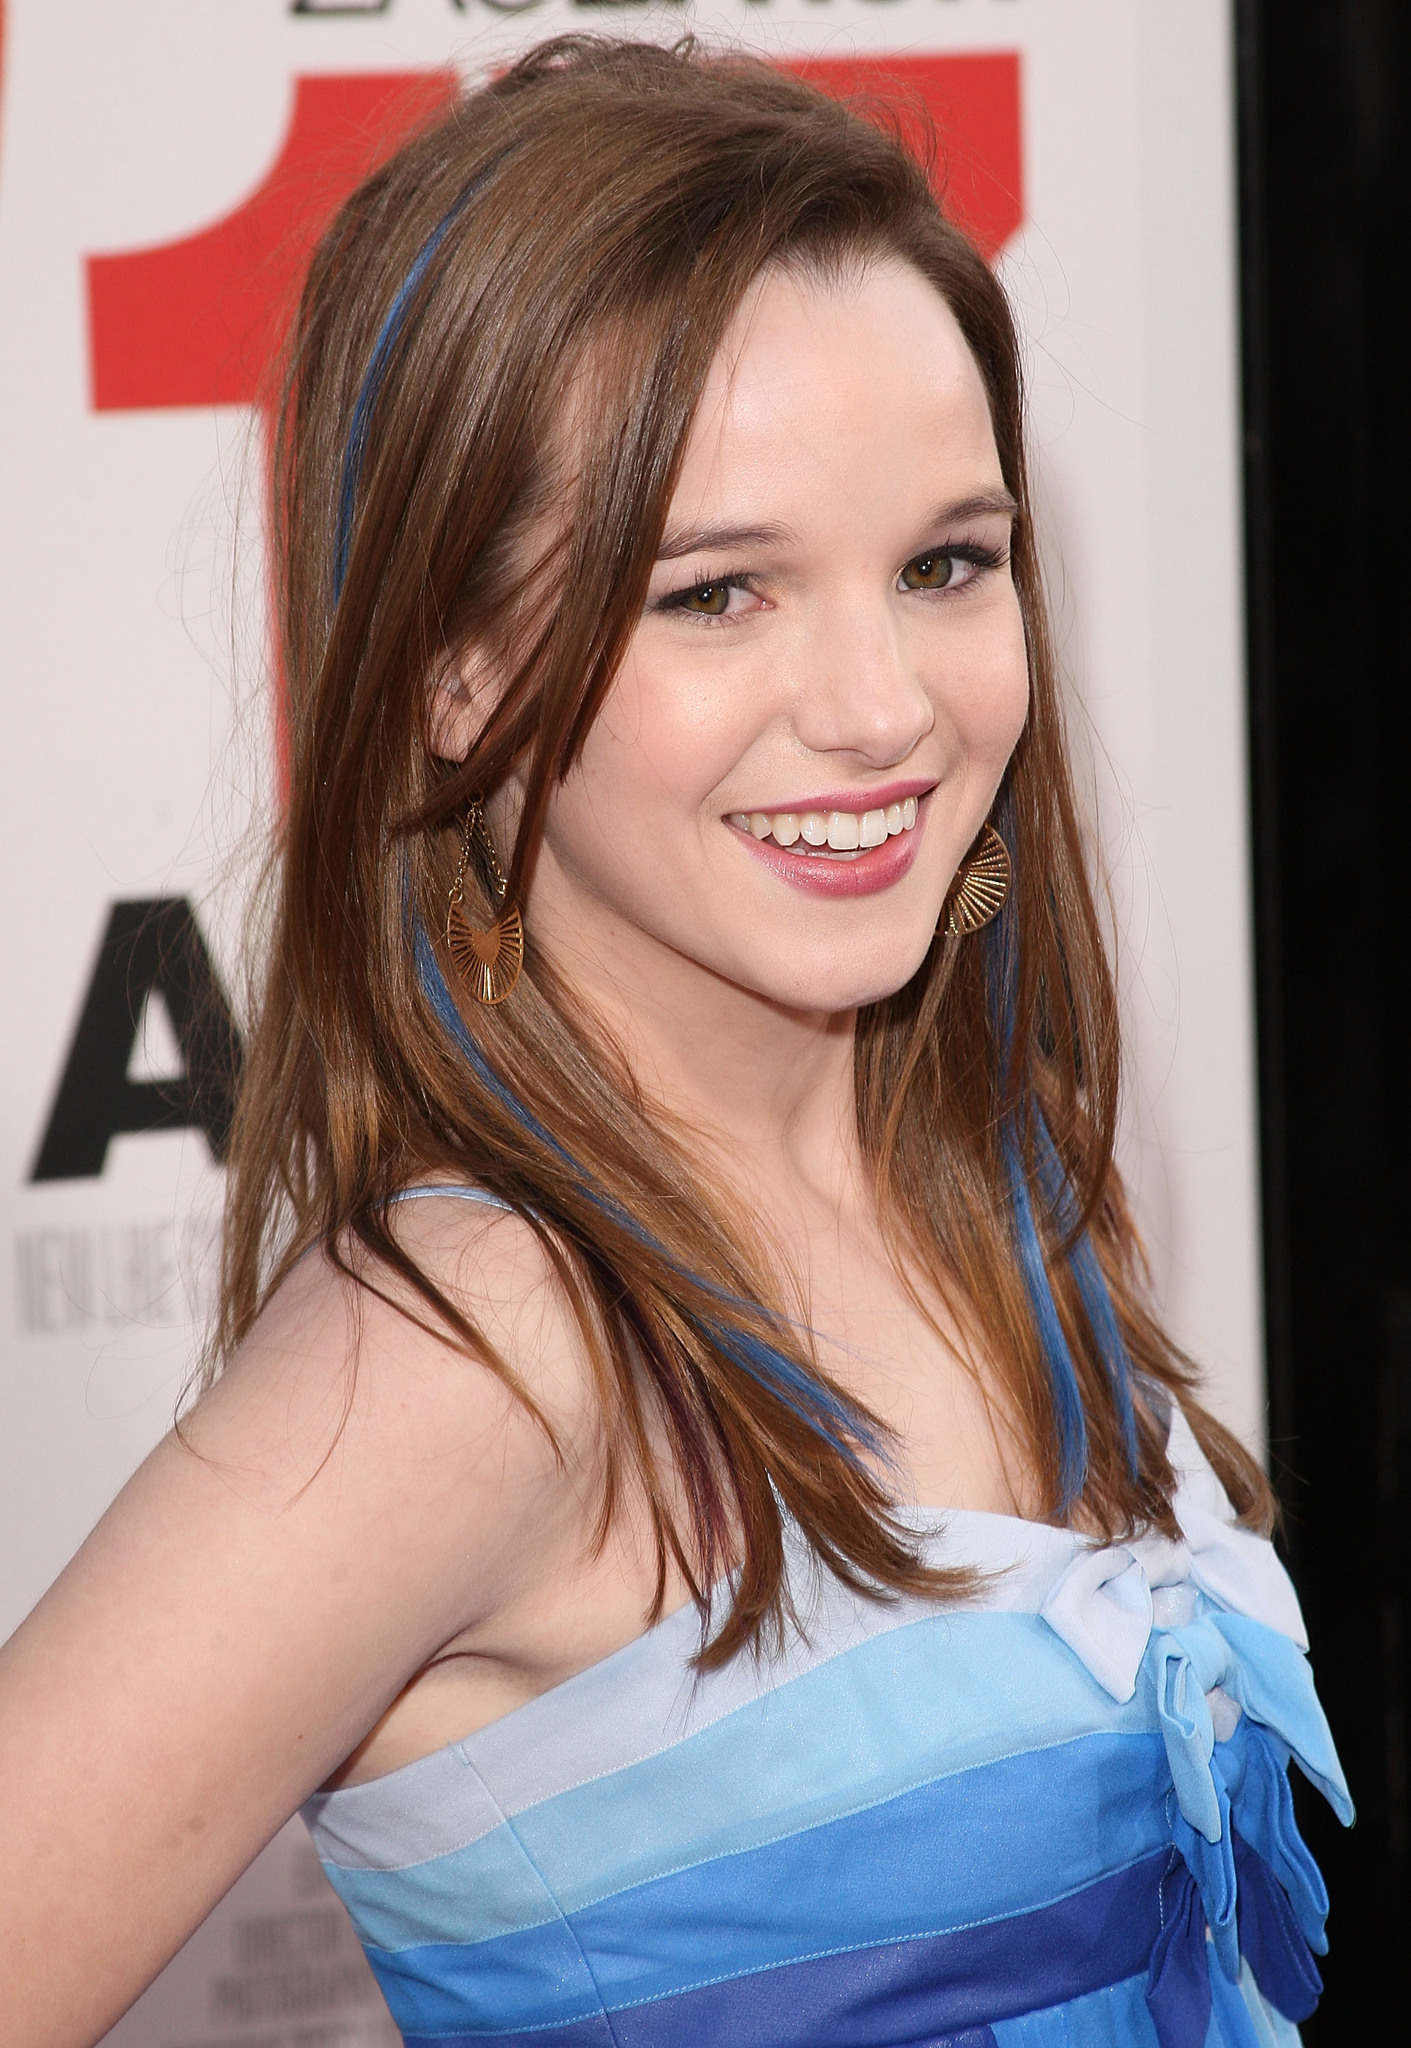 Kay Panabaker arrives at the premiere of Warner Bros. '17 Again' held at Grauman's Chinese Theatre on April 14, 2009 in Hollywood, California.